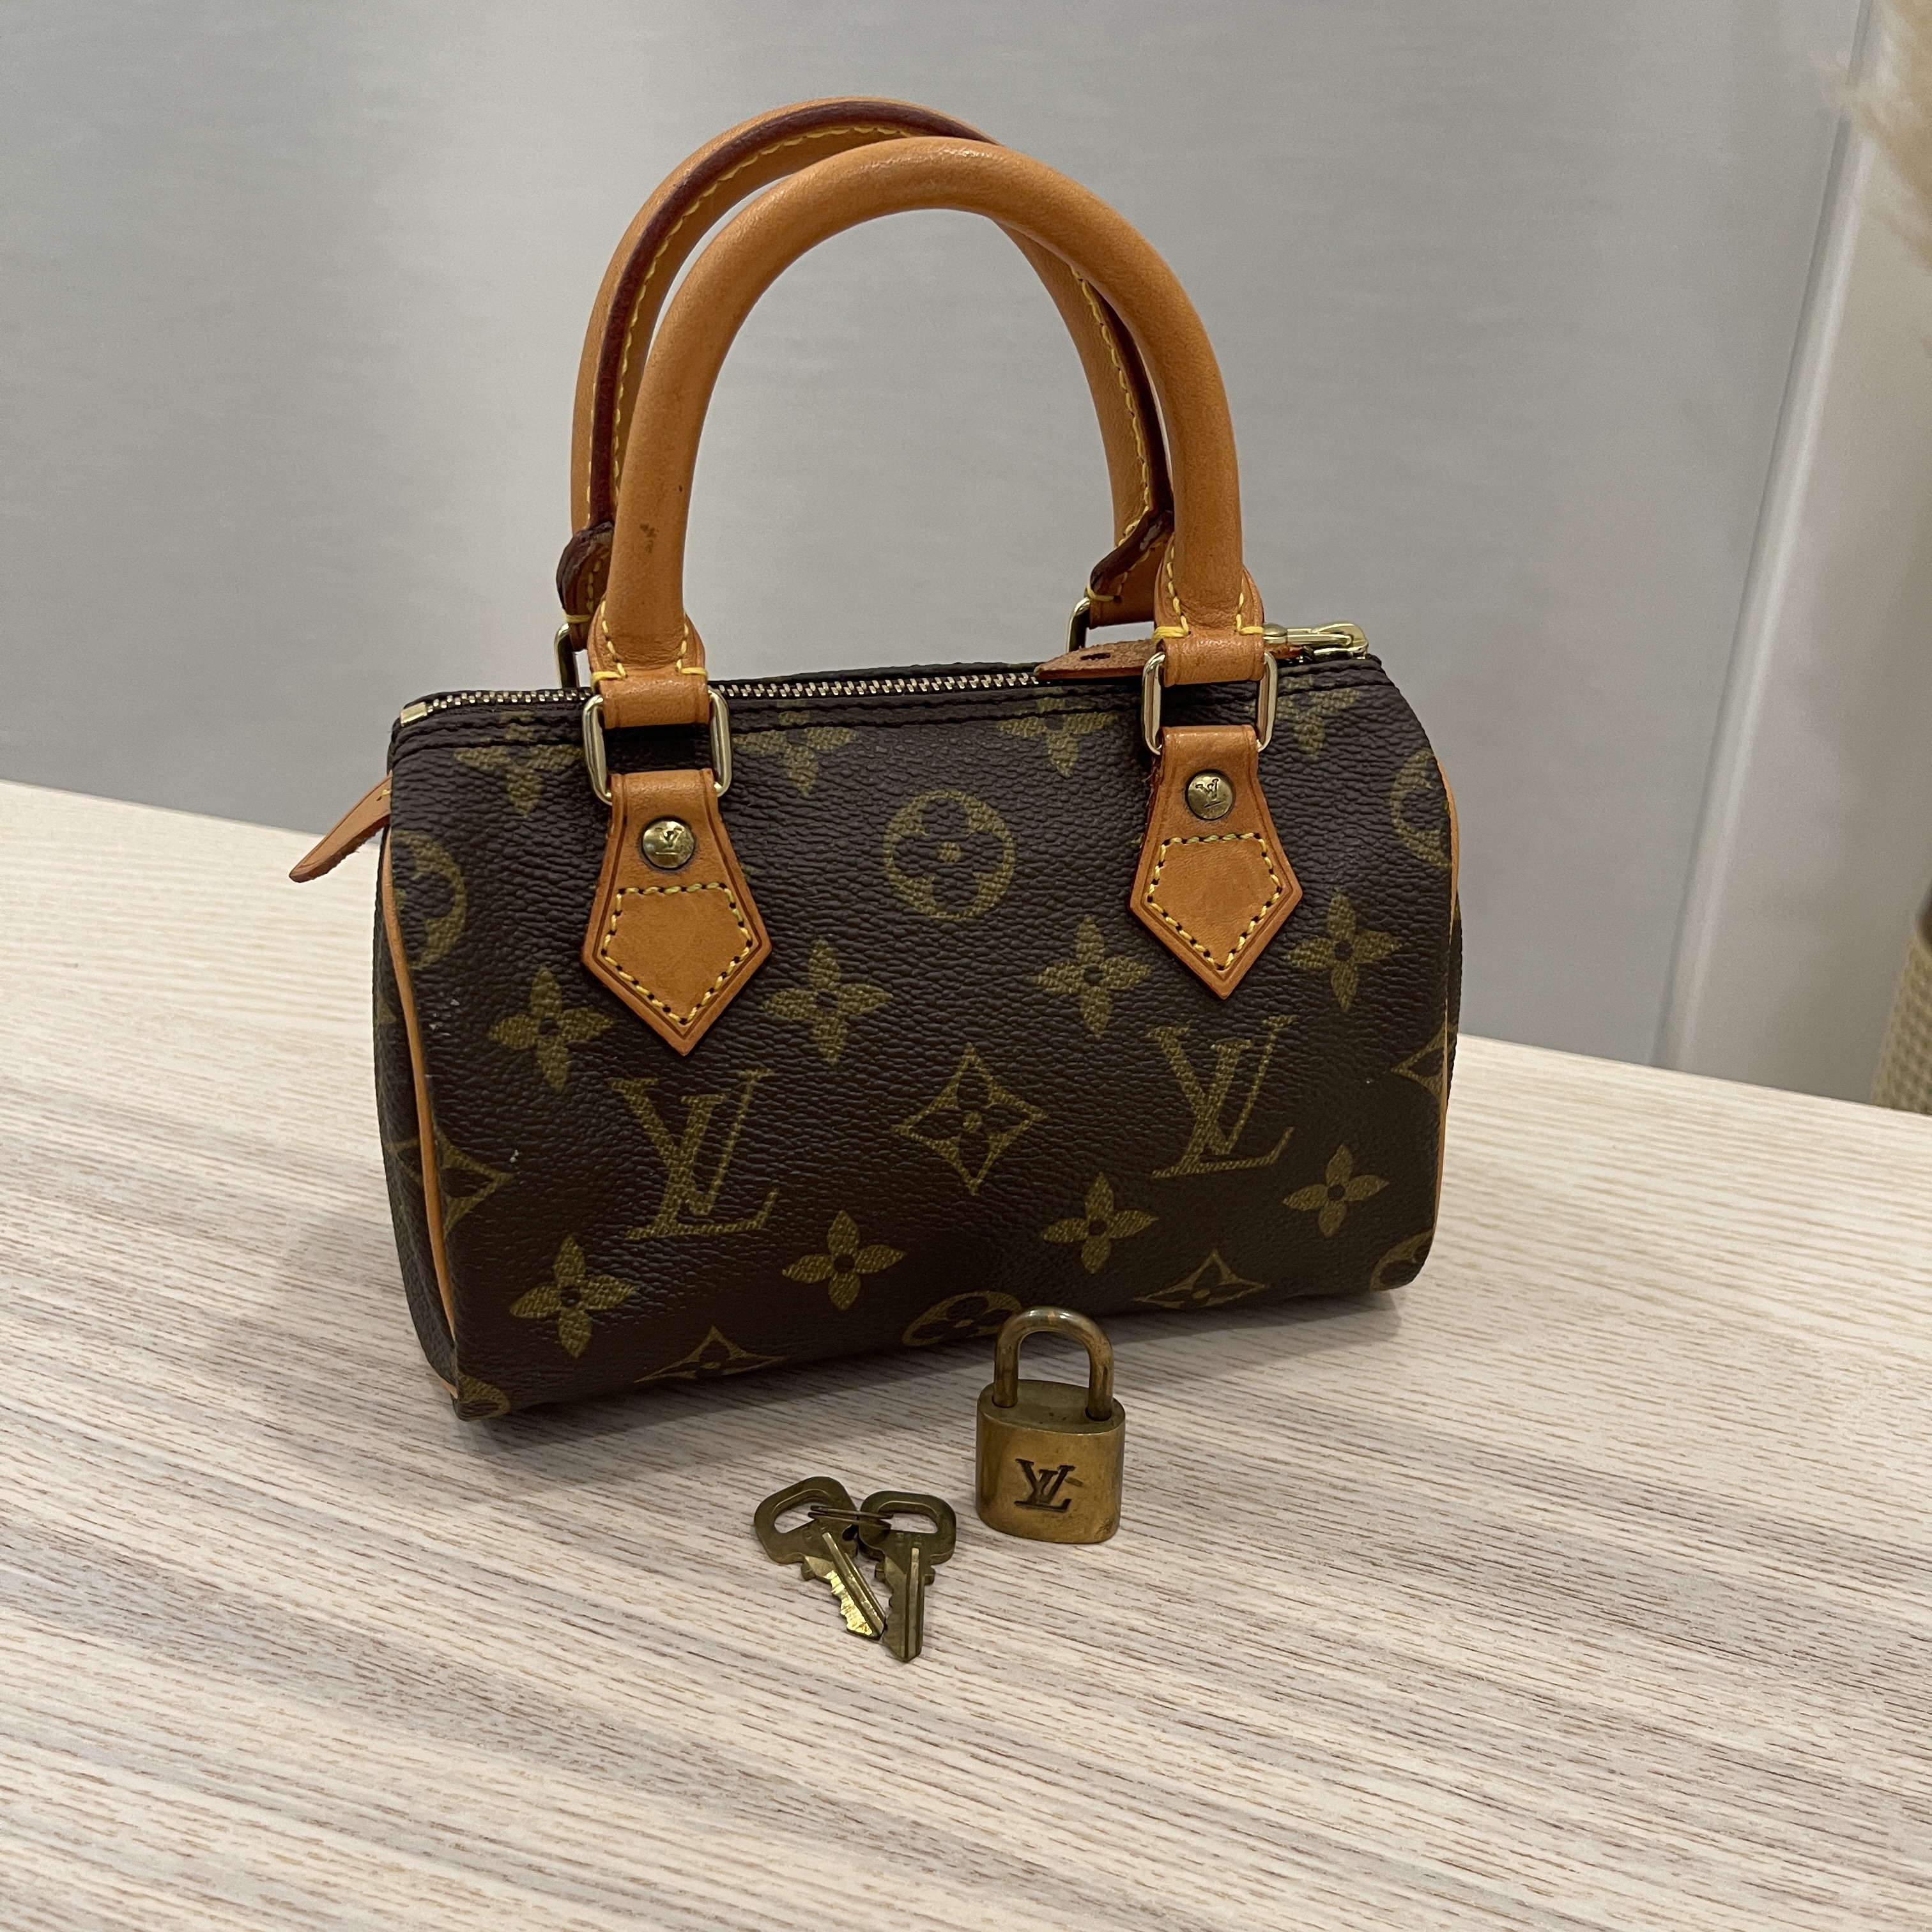 Nano Speedy / Mini HL  Buy or Sell your Louis Vuitton bags